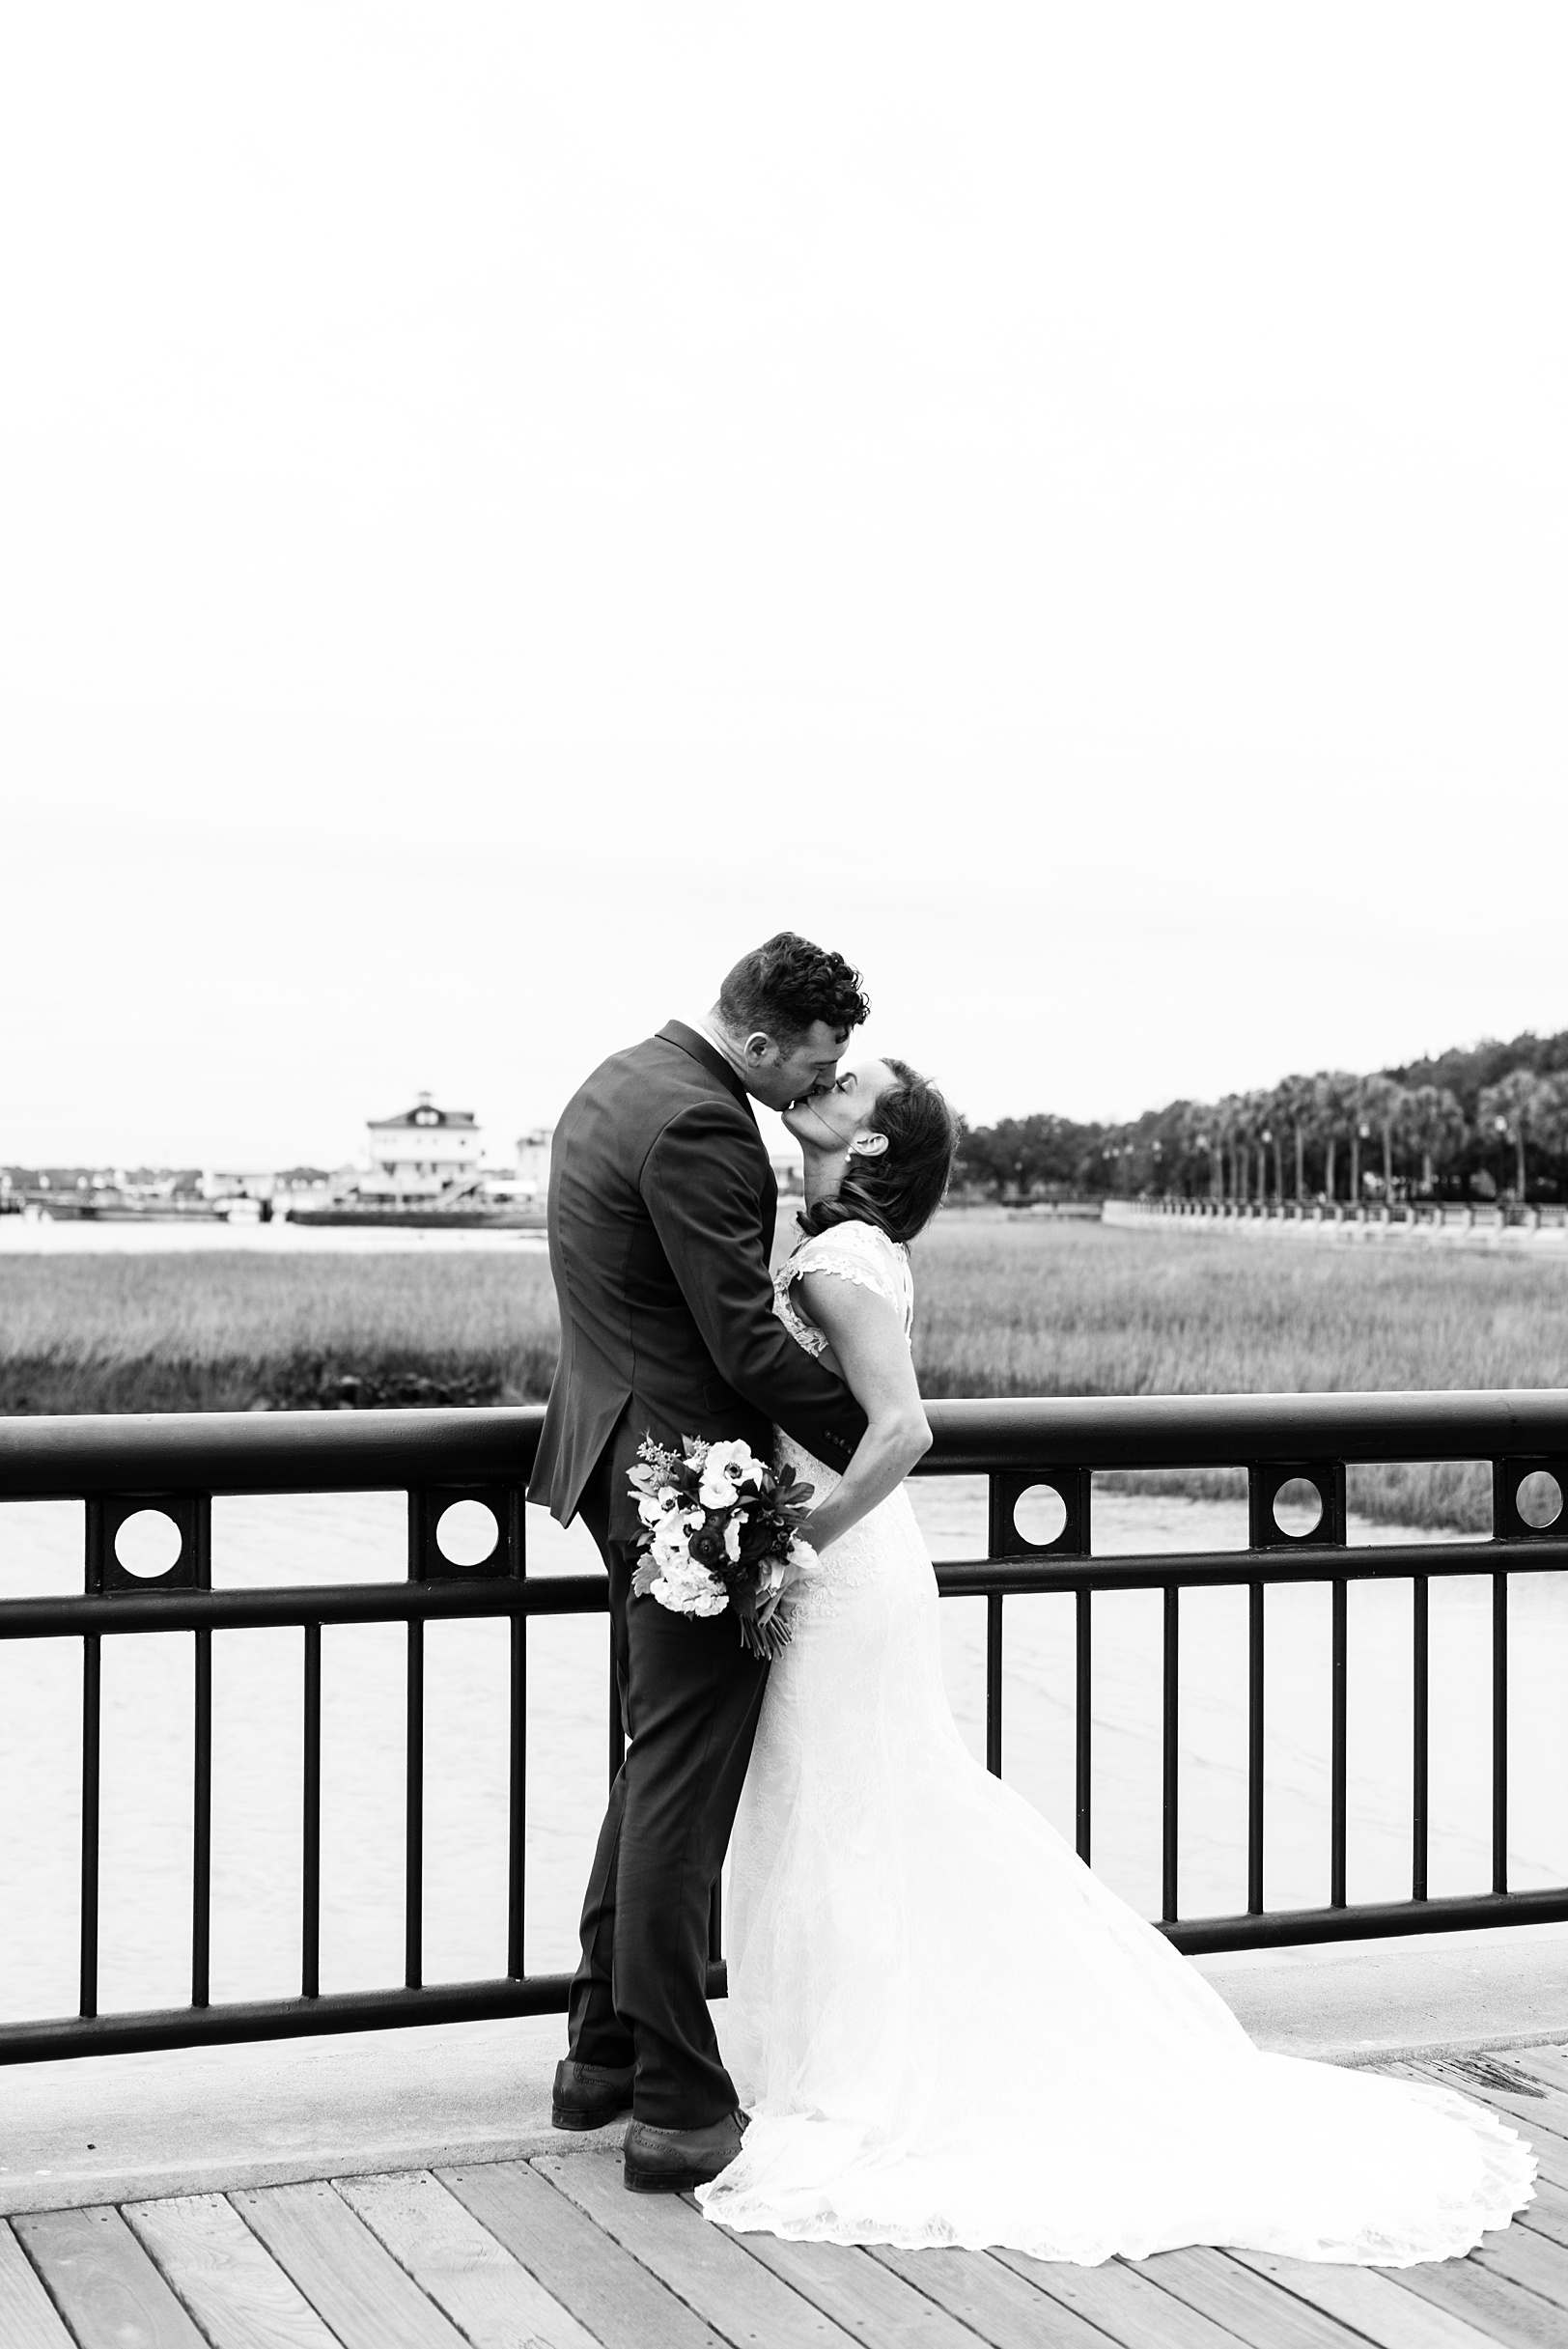 BW Bride and Groom kiss at Waterfront Park | Kaitlin Scott Photography